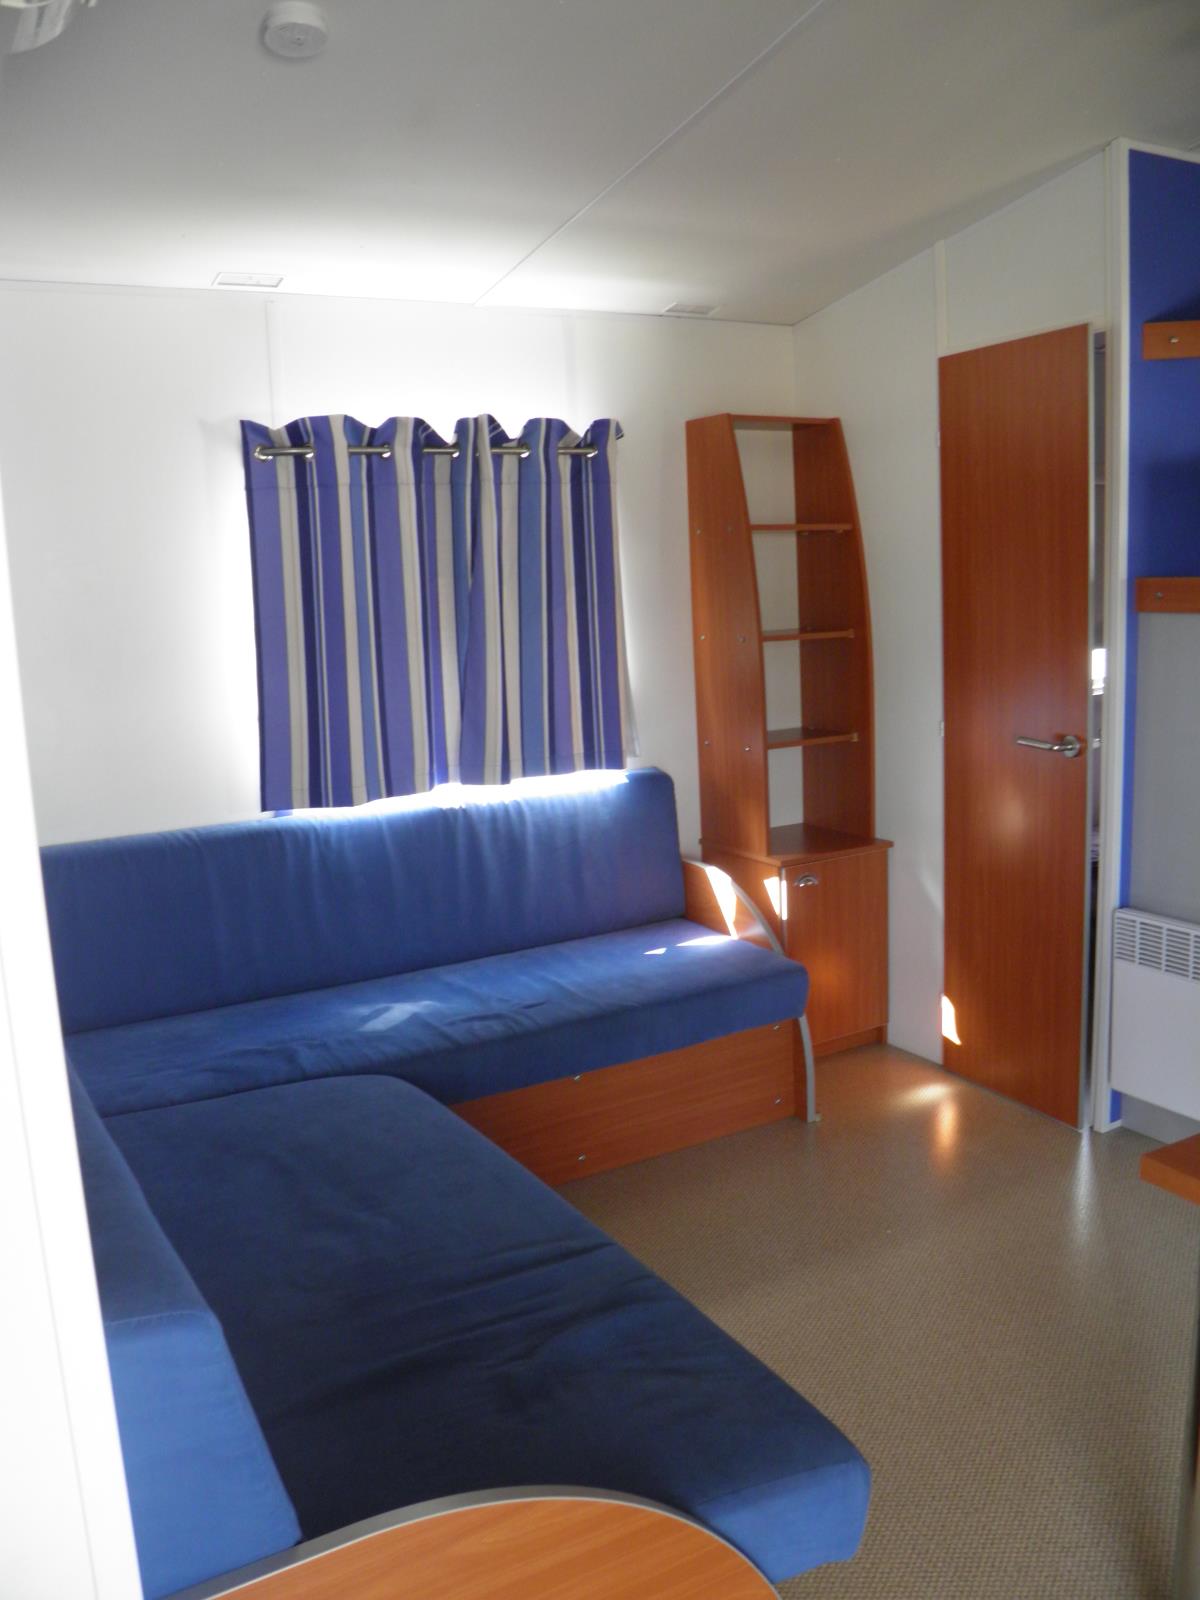 Accommodation - Ib Mobile Home Loft Rapidhome 30M² + Air-Conditioning 2 Bedrooms - Camping Le Sous-Bois Ardèche